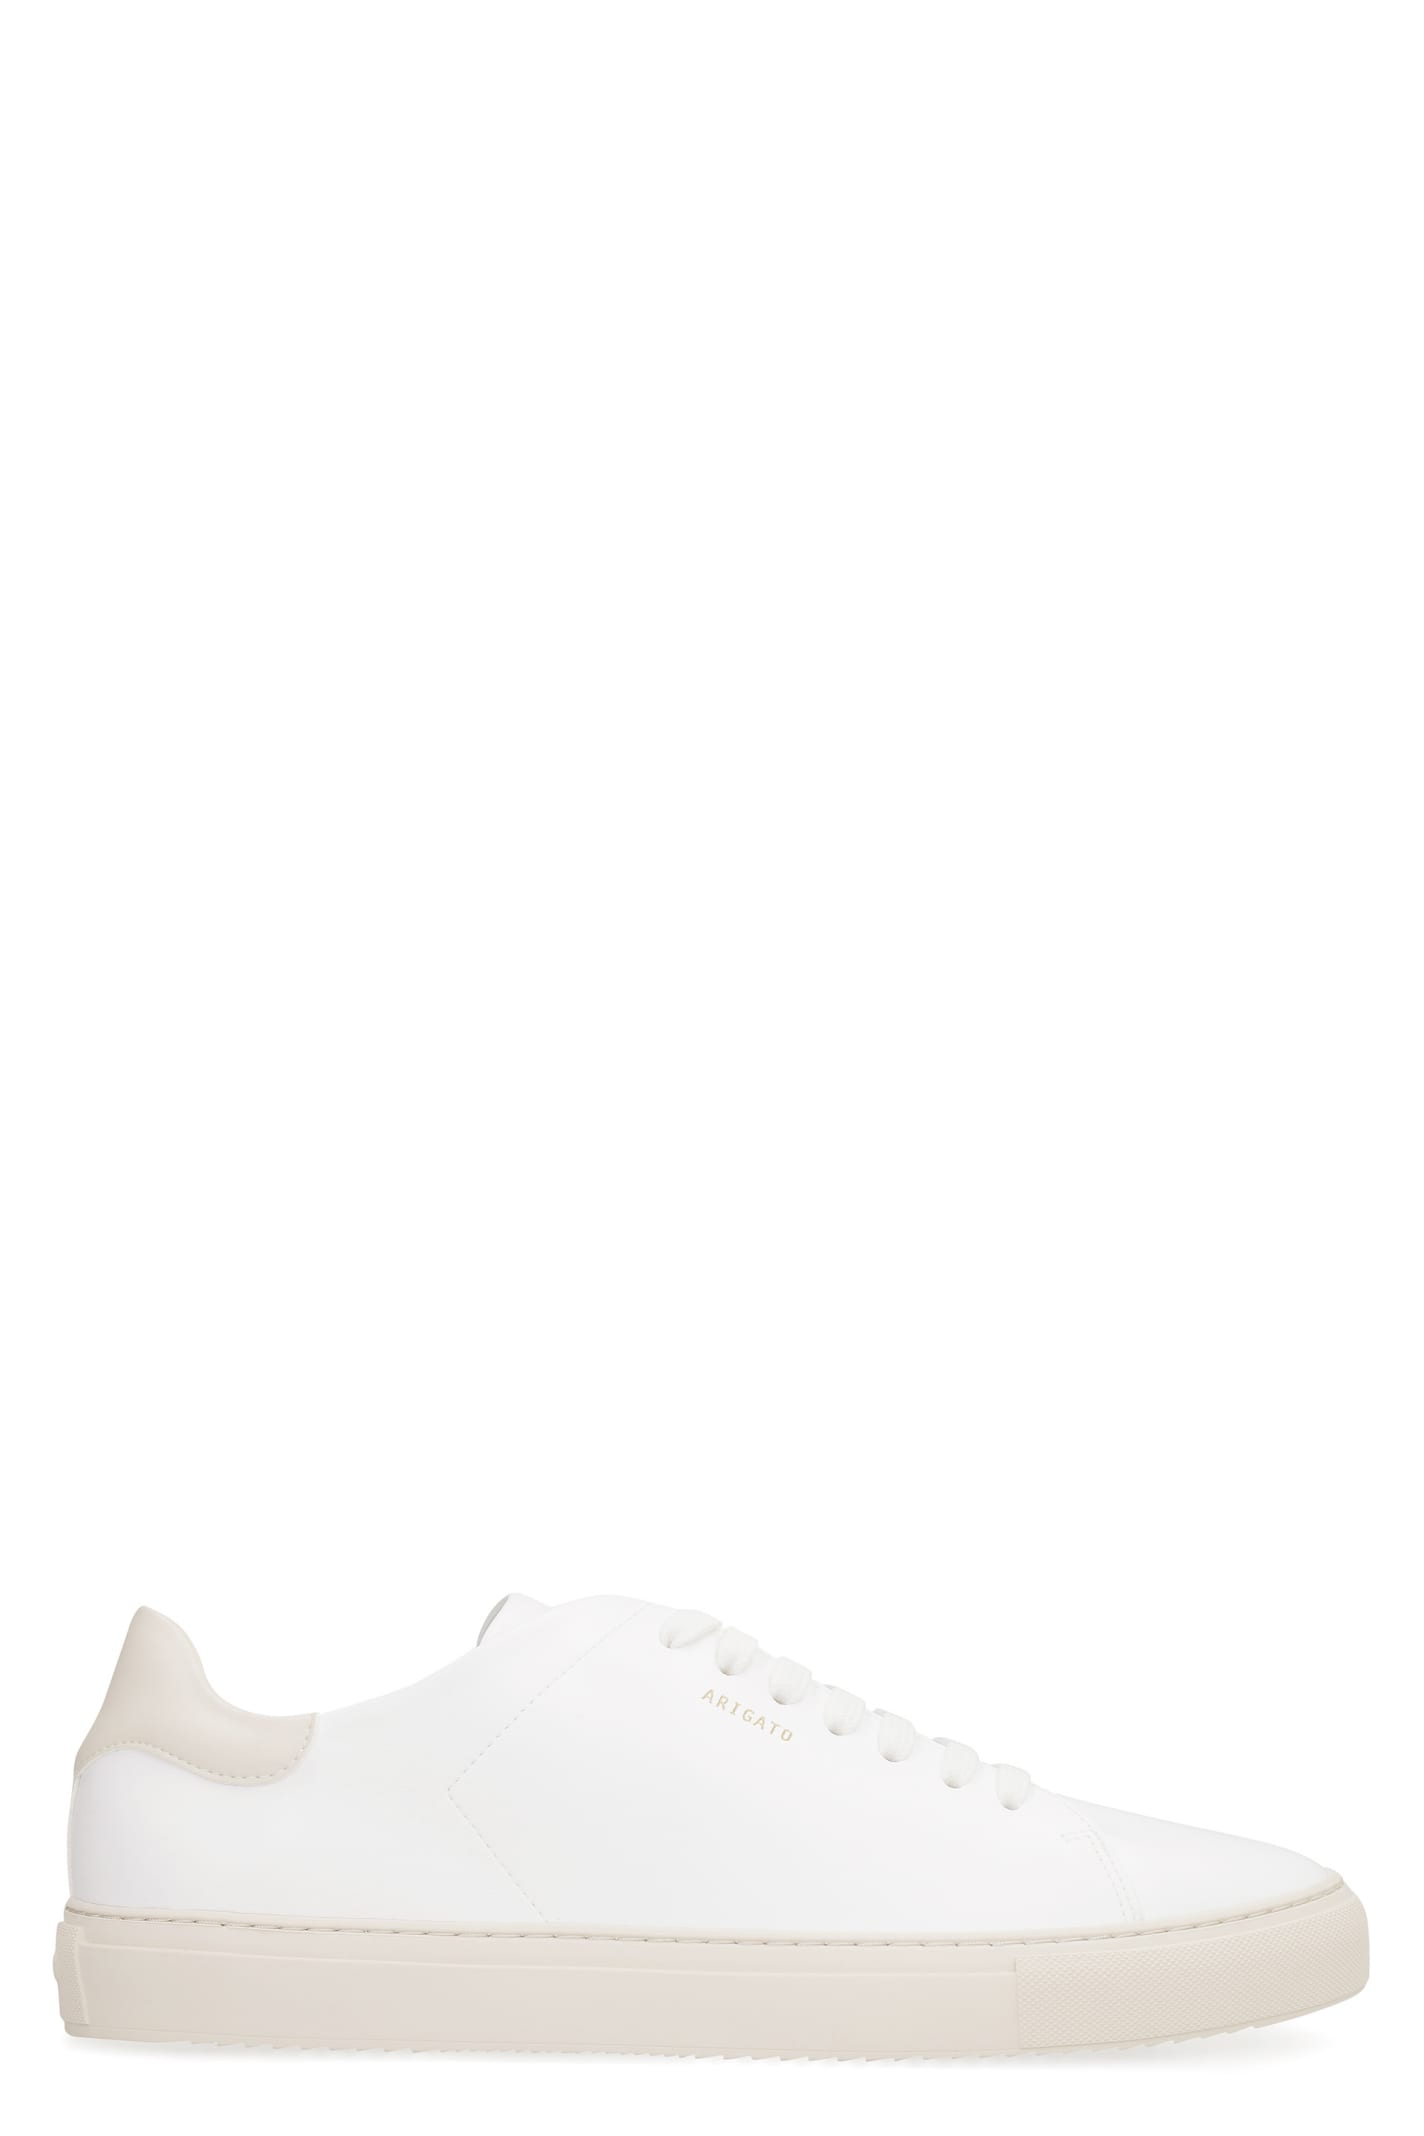 Axel Arigato Clean 90 Faux Leather Sneakers